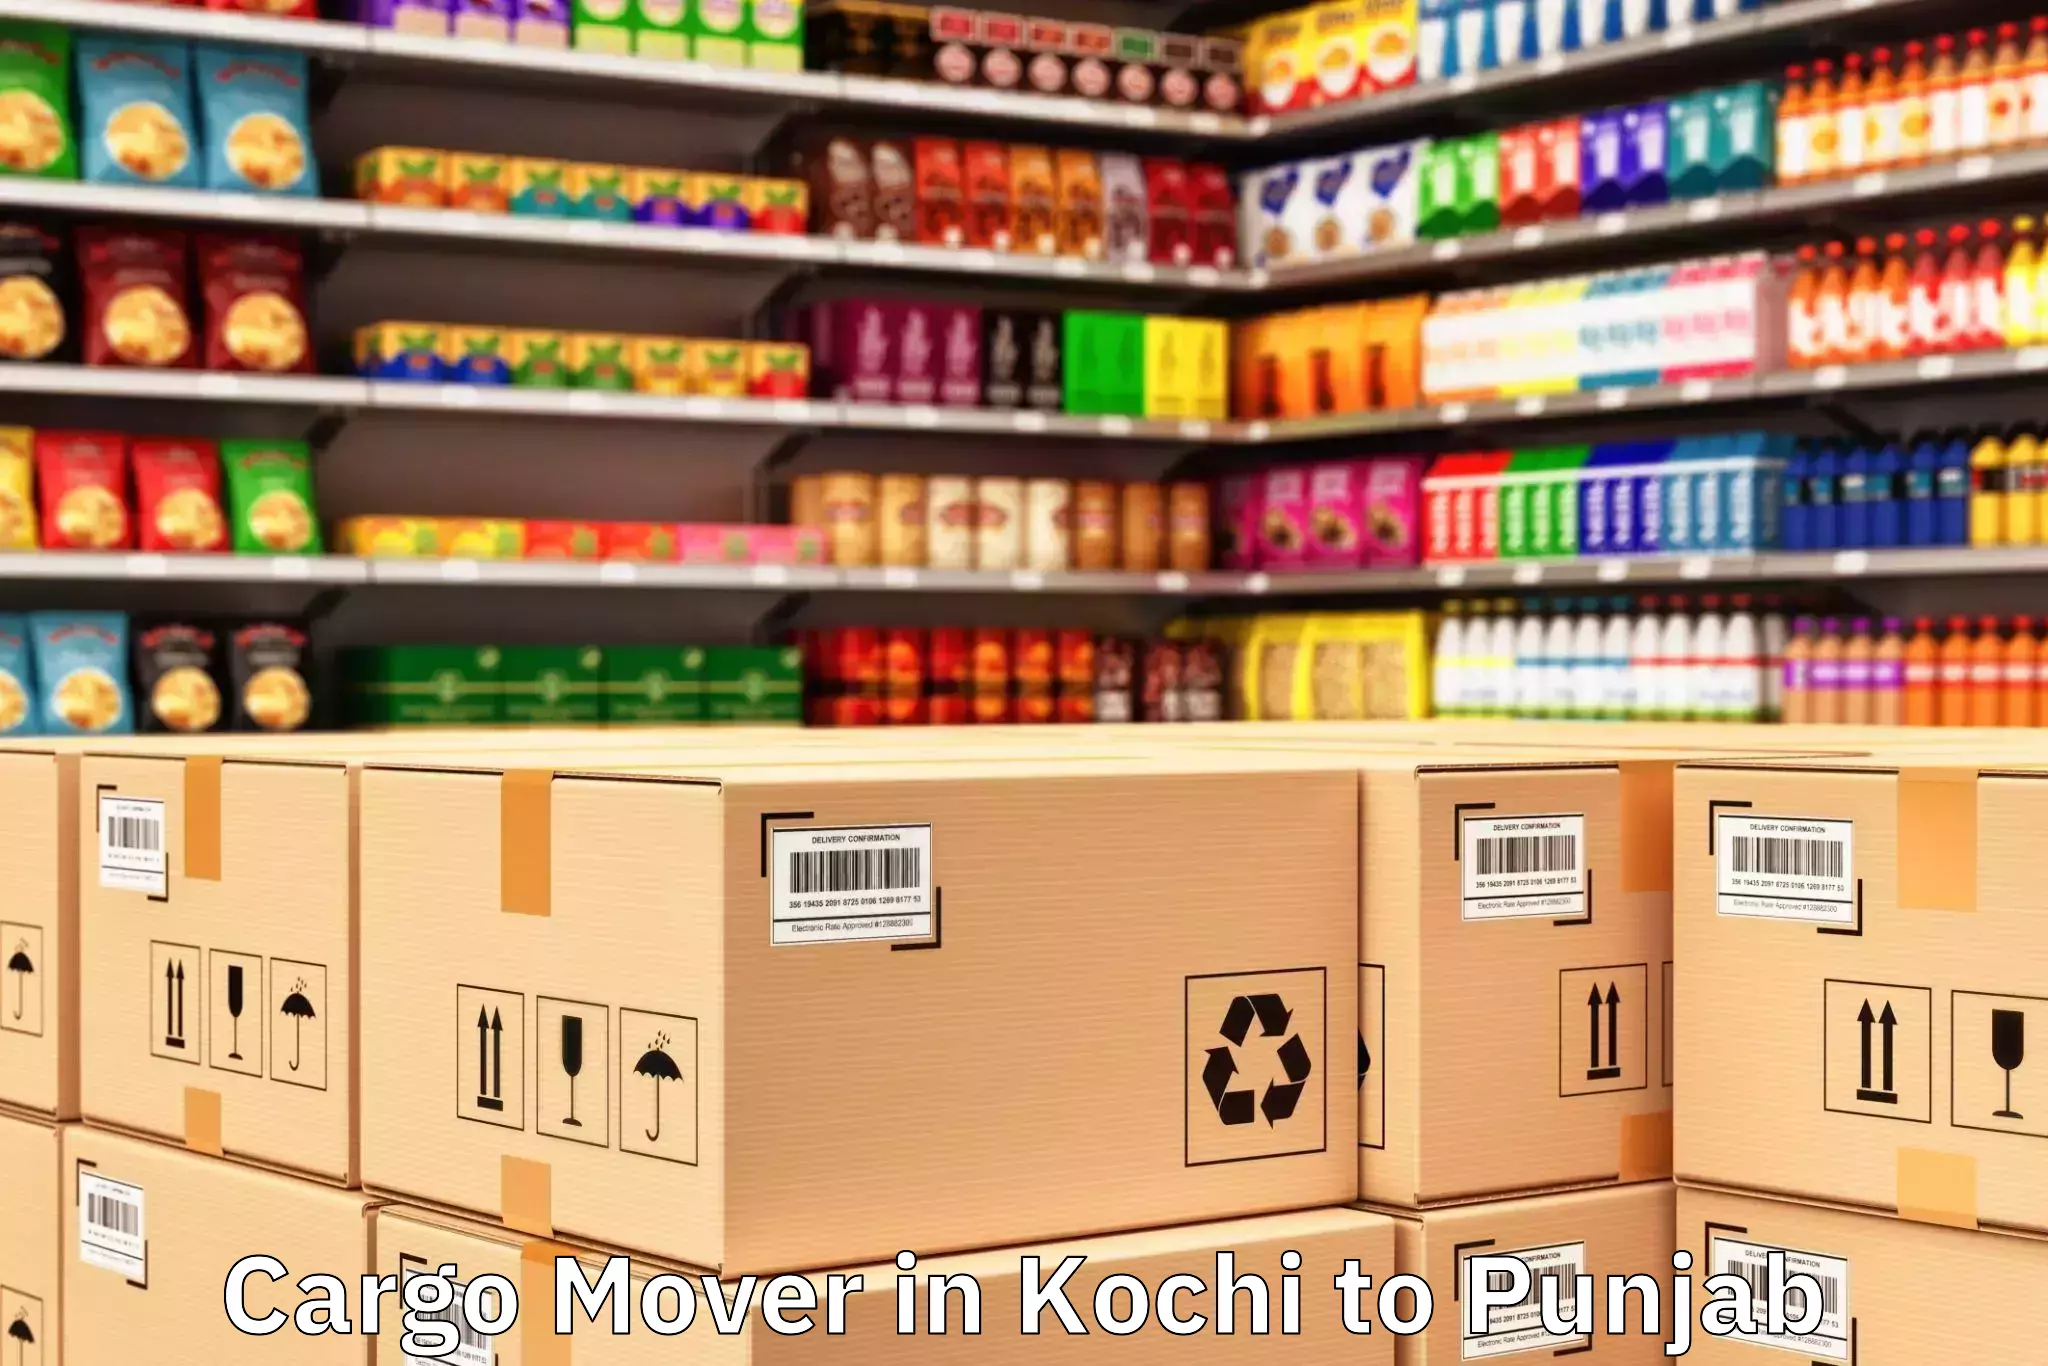 Trusted Kochi to Vr Mall Punjab Cargo Mover